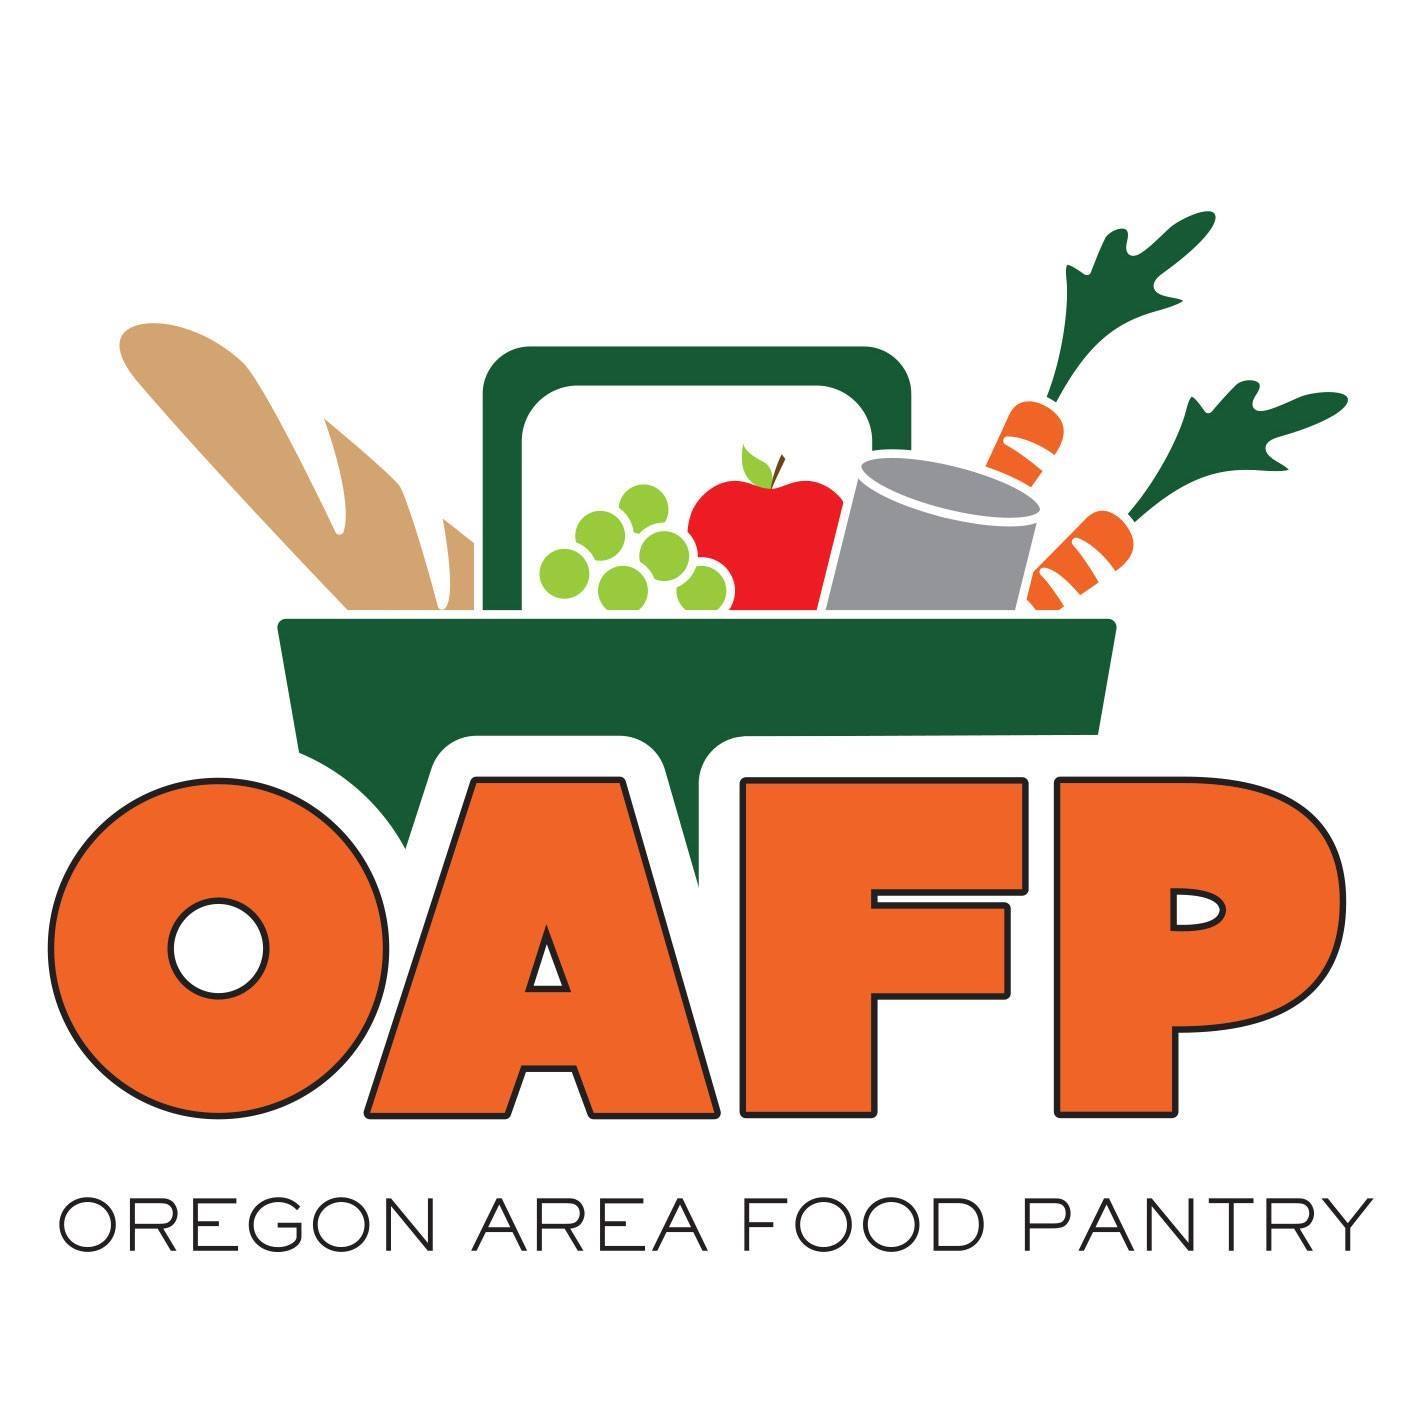 Logo shows OAFP in large orange letters, Oregon Area Food Pantry in smaller black letters, with picture of shopping basket containing food.